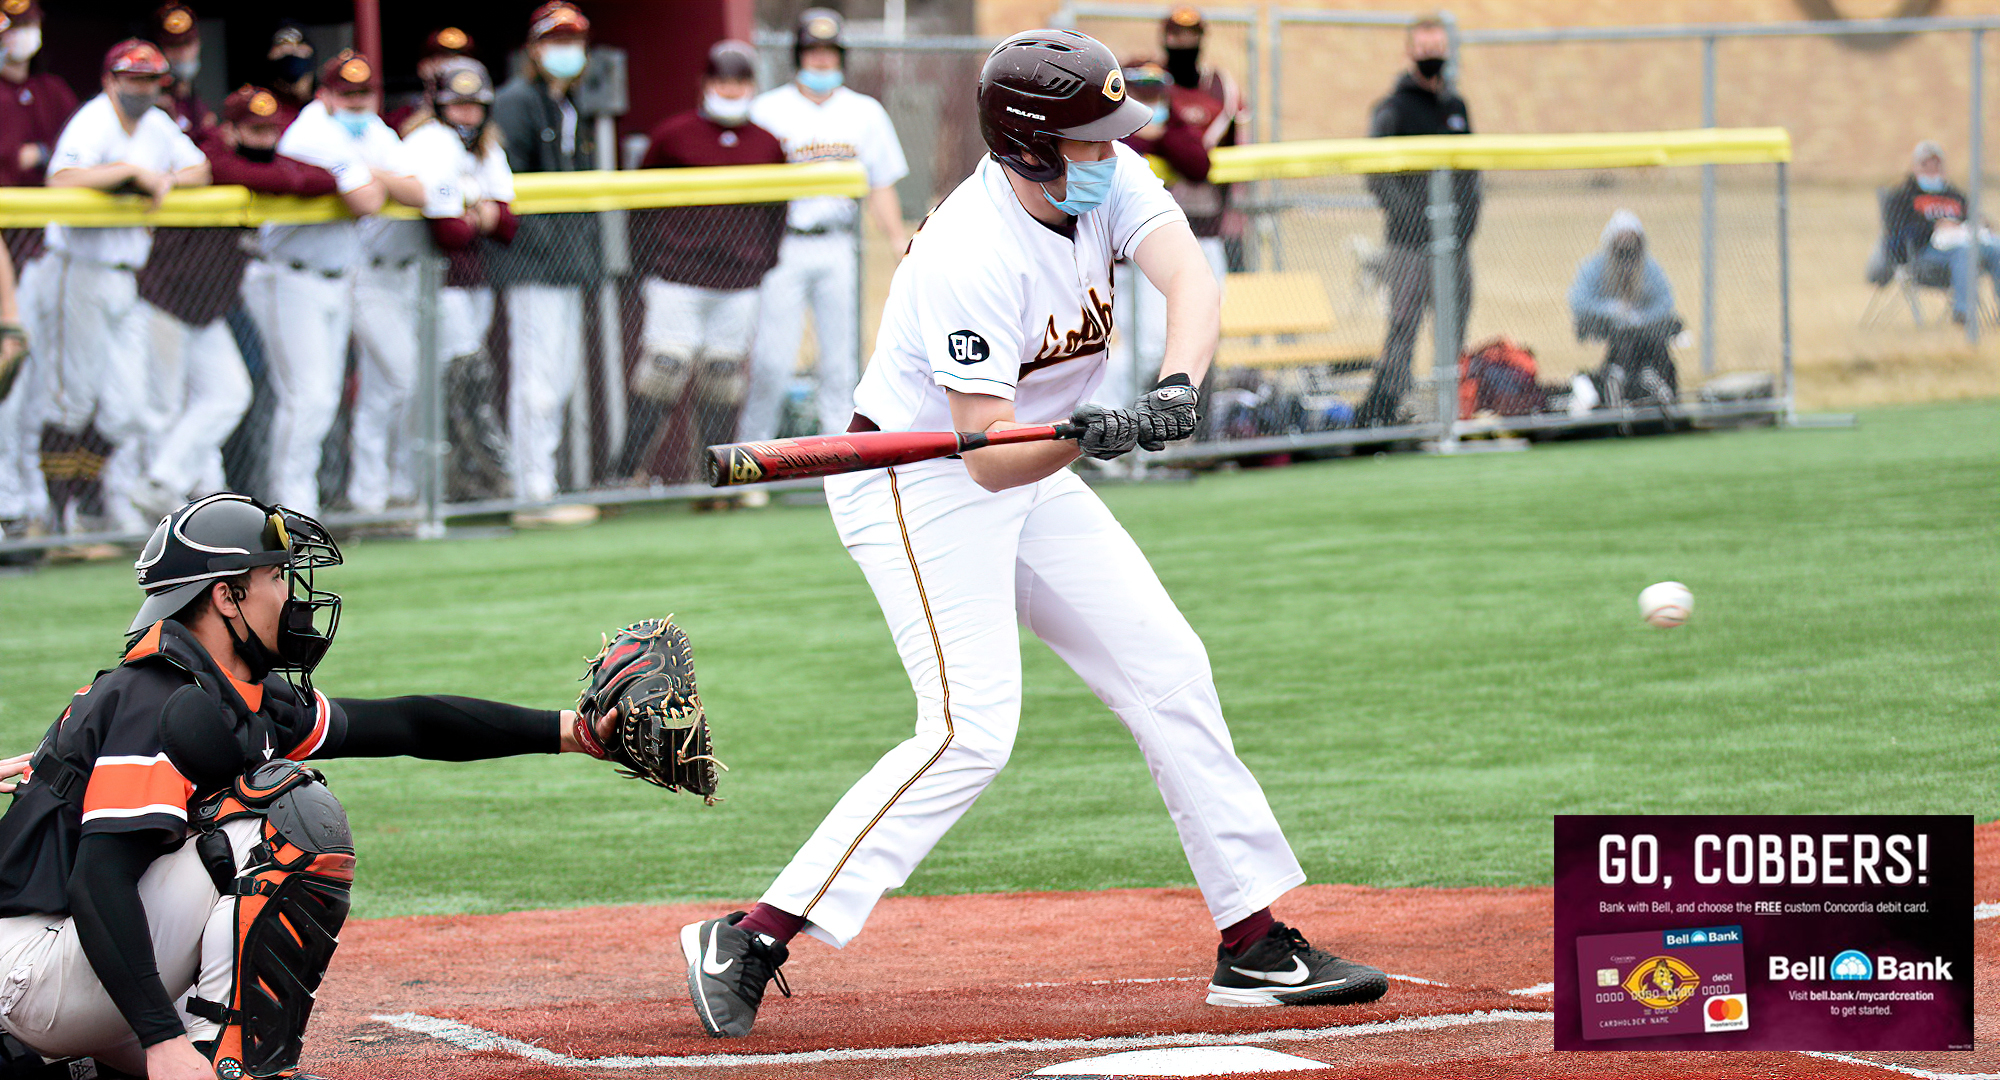 Senior Ben Swanson gets ready to connect on a single in the first inning of the Cobbers' home opener against Jamestown. The single extended Swanson's hit streak to five games.